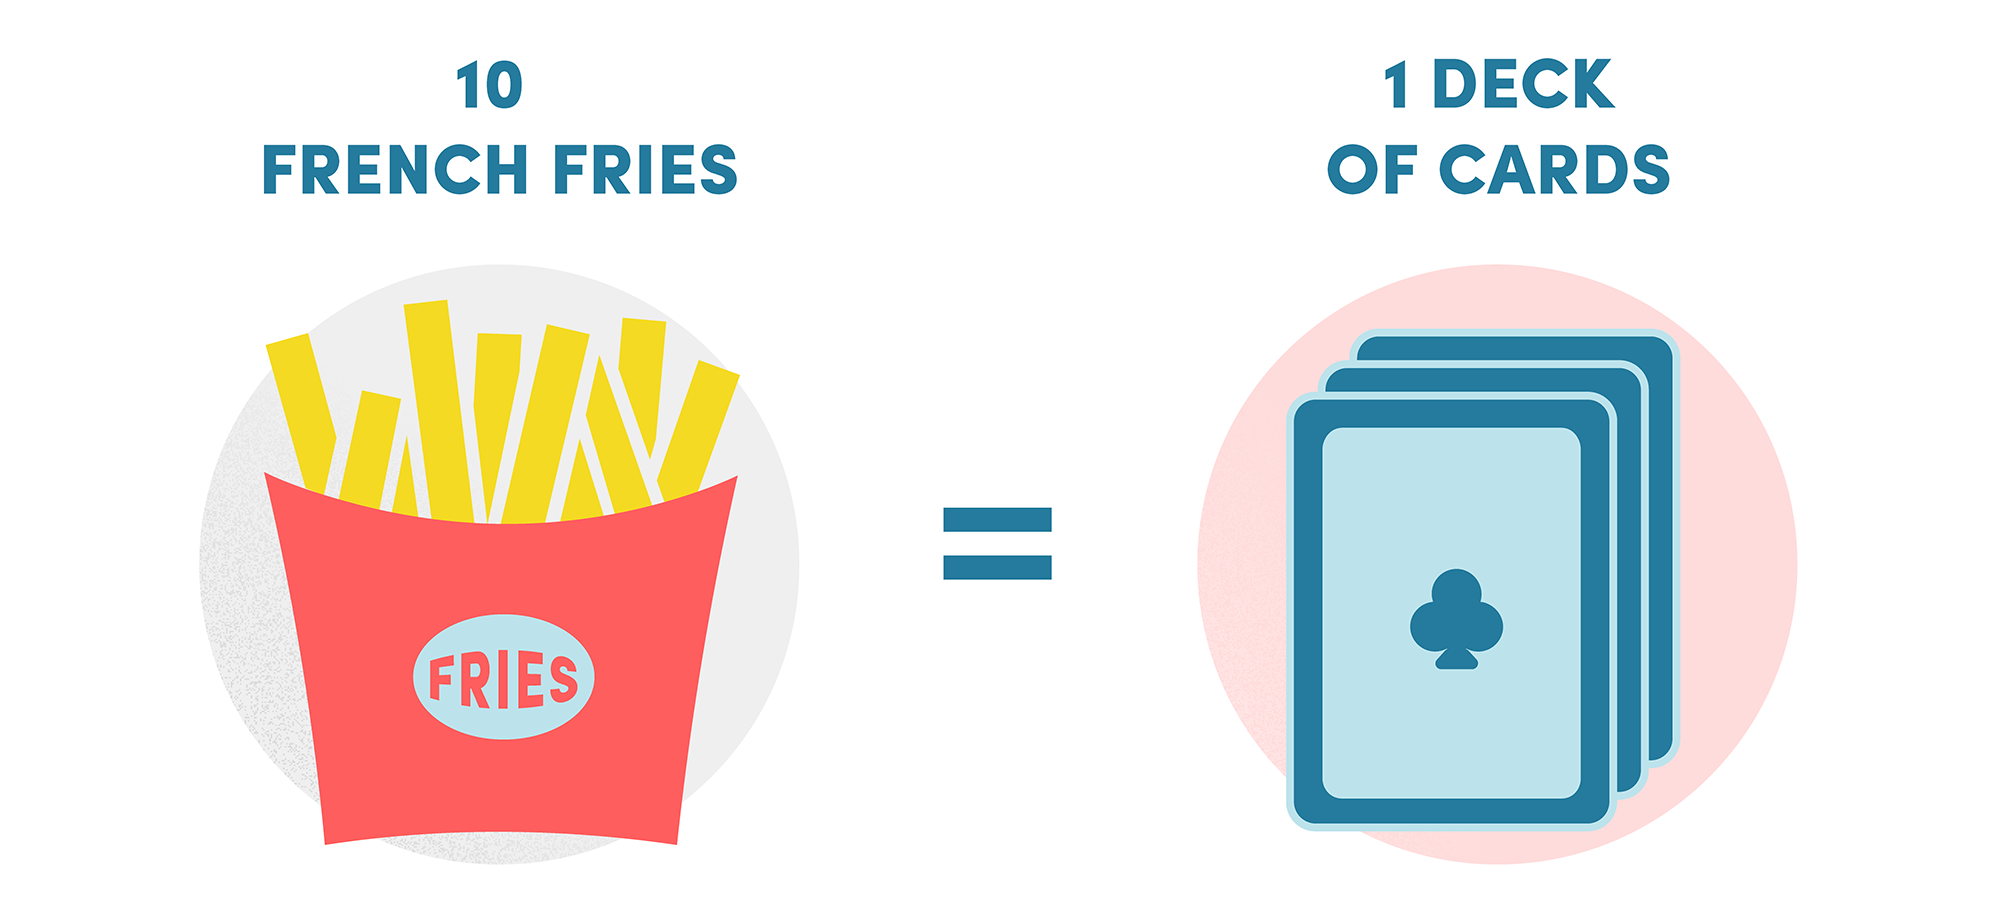 10 French Fries Equals One Deck Of Cards